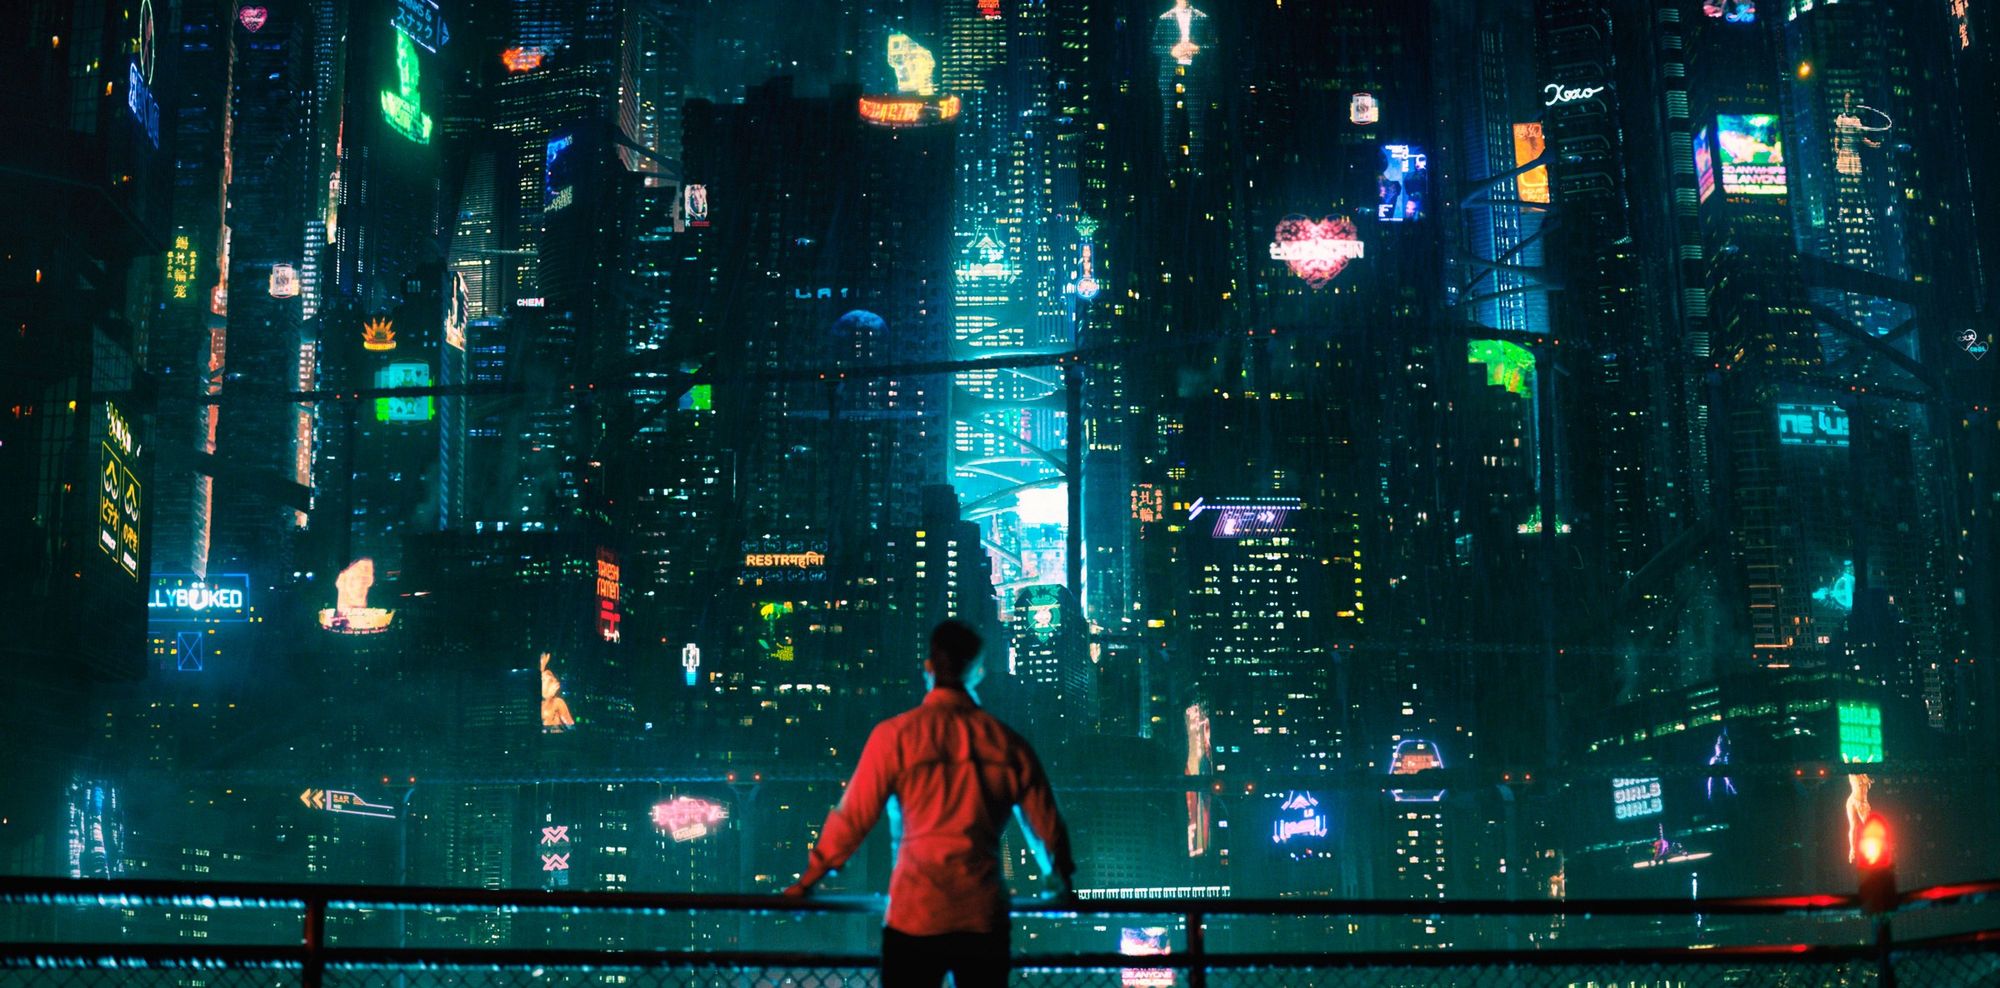 Altered Carbon / Takeshi Kovacs